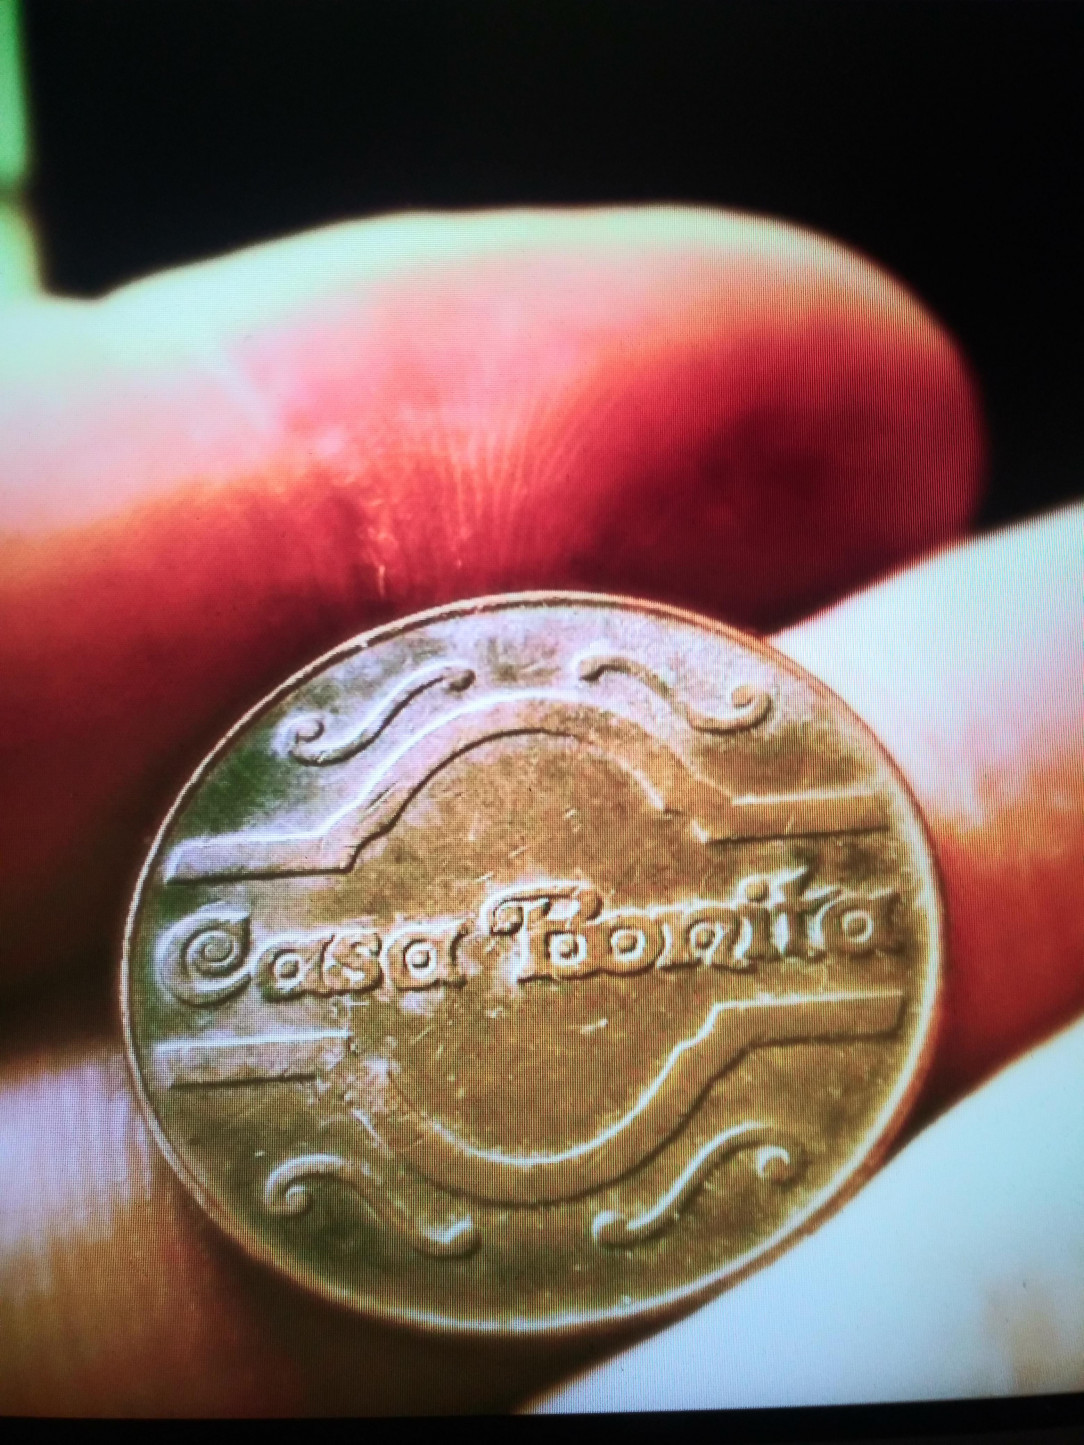 An ancient coin, a relic from a lost civilization